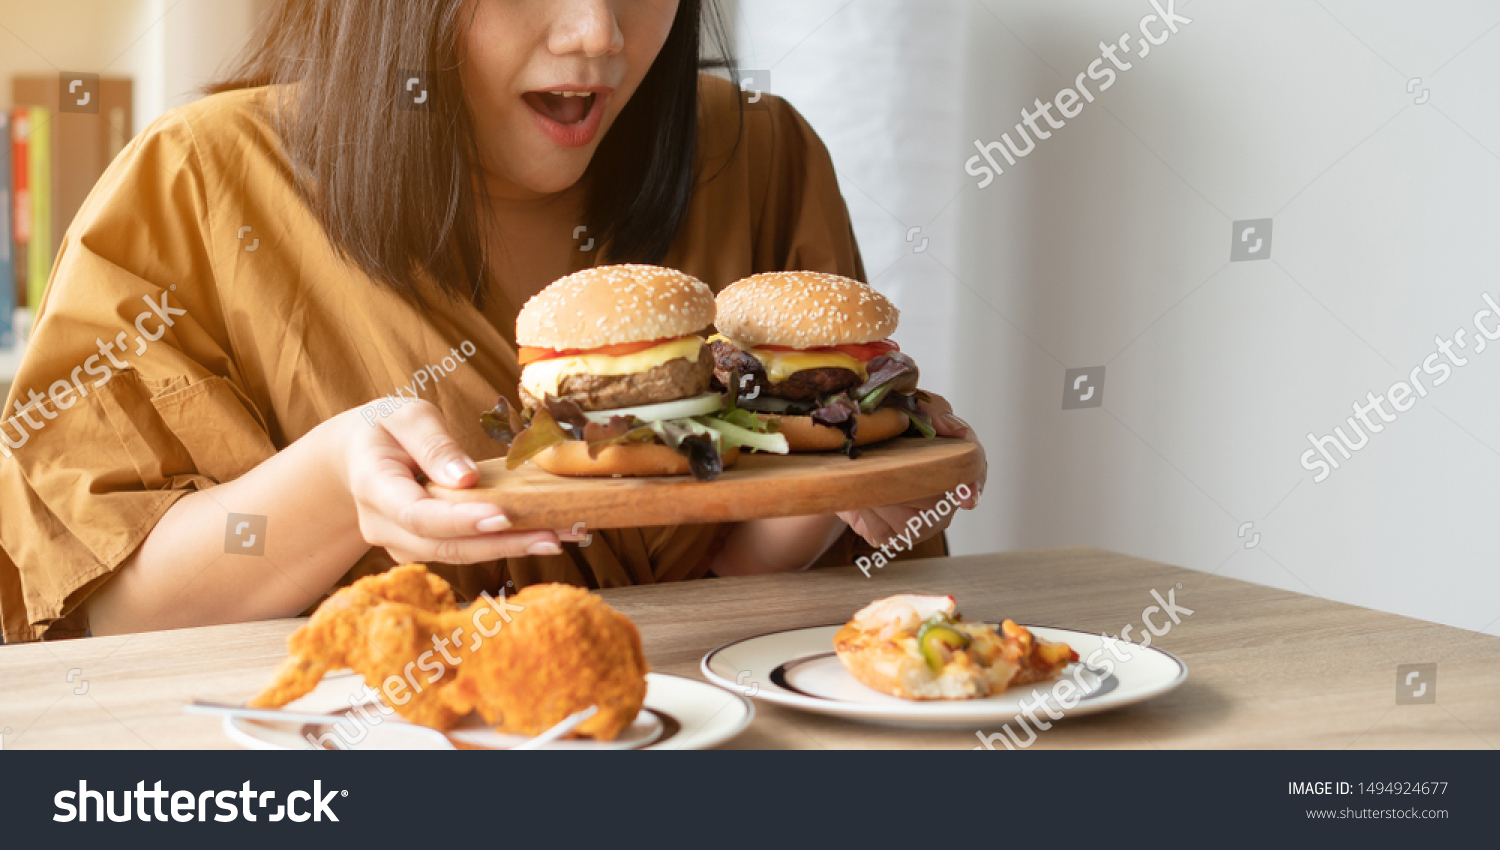 Hungry overweight woman holding hamburger on wooden plate, Fried chicken and Pizza on table .Concept of binge eating disorder (BED). #1494924677